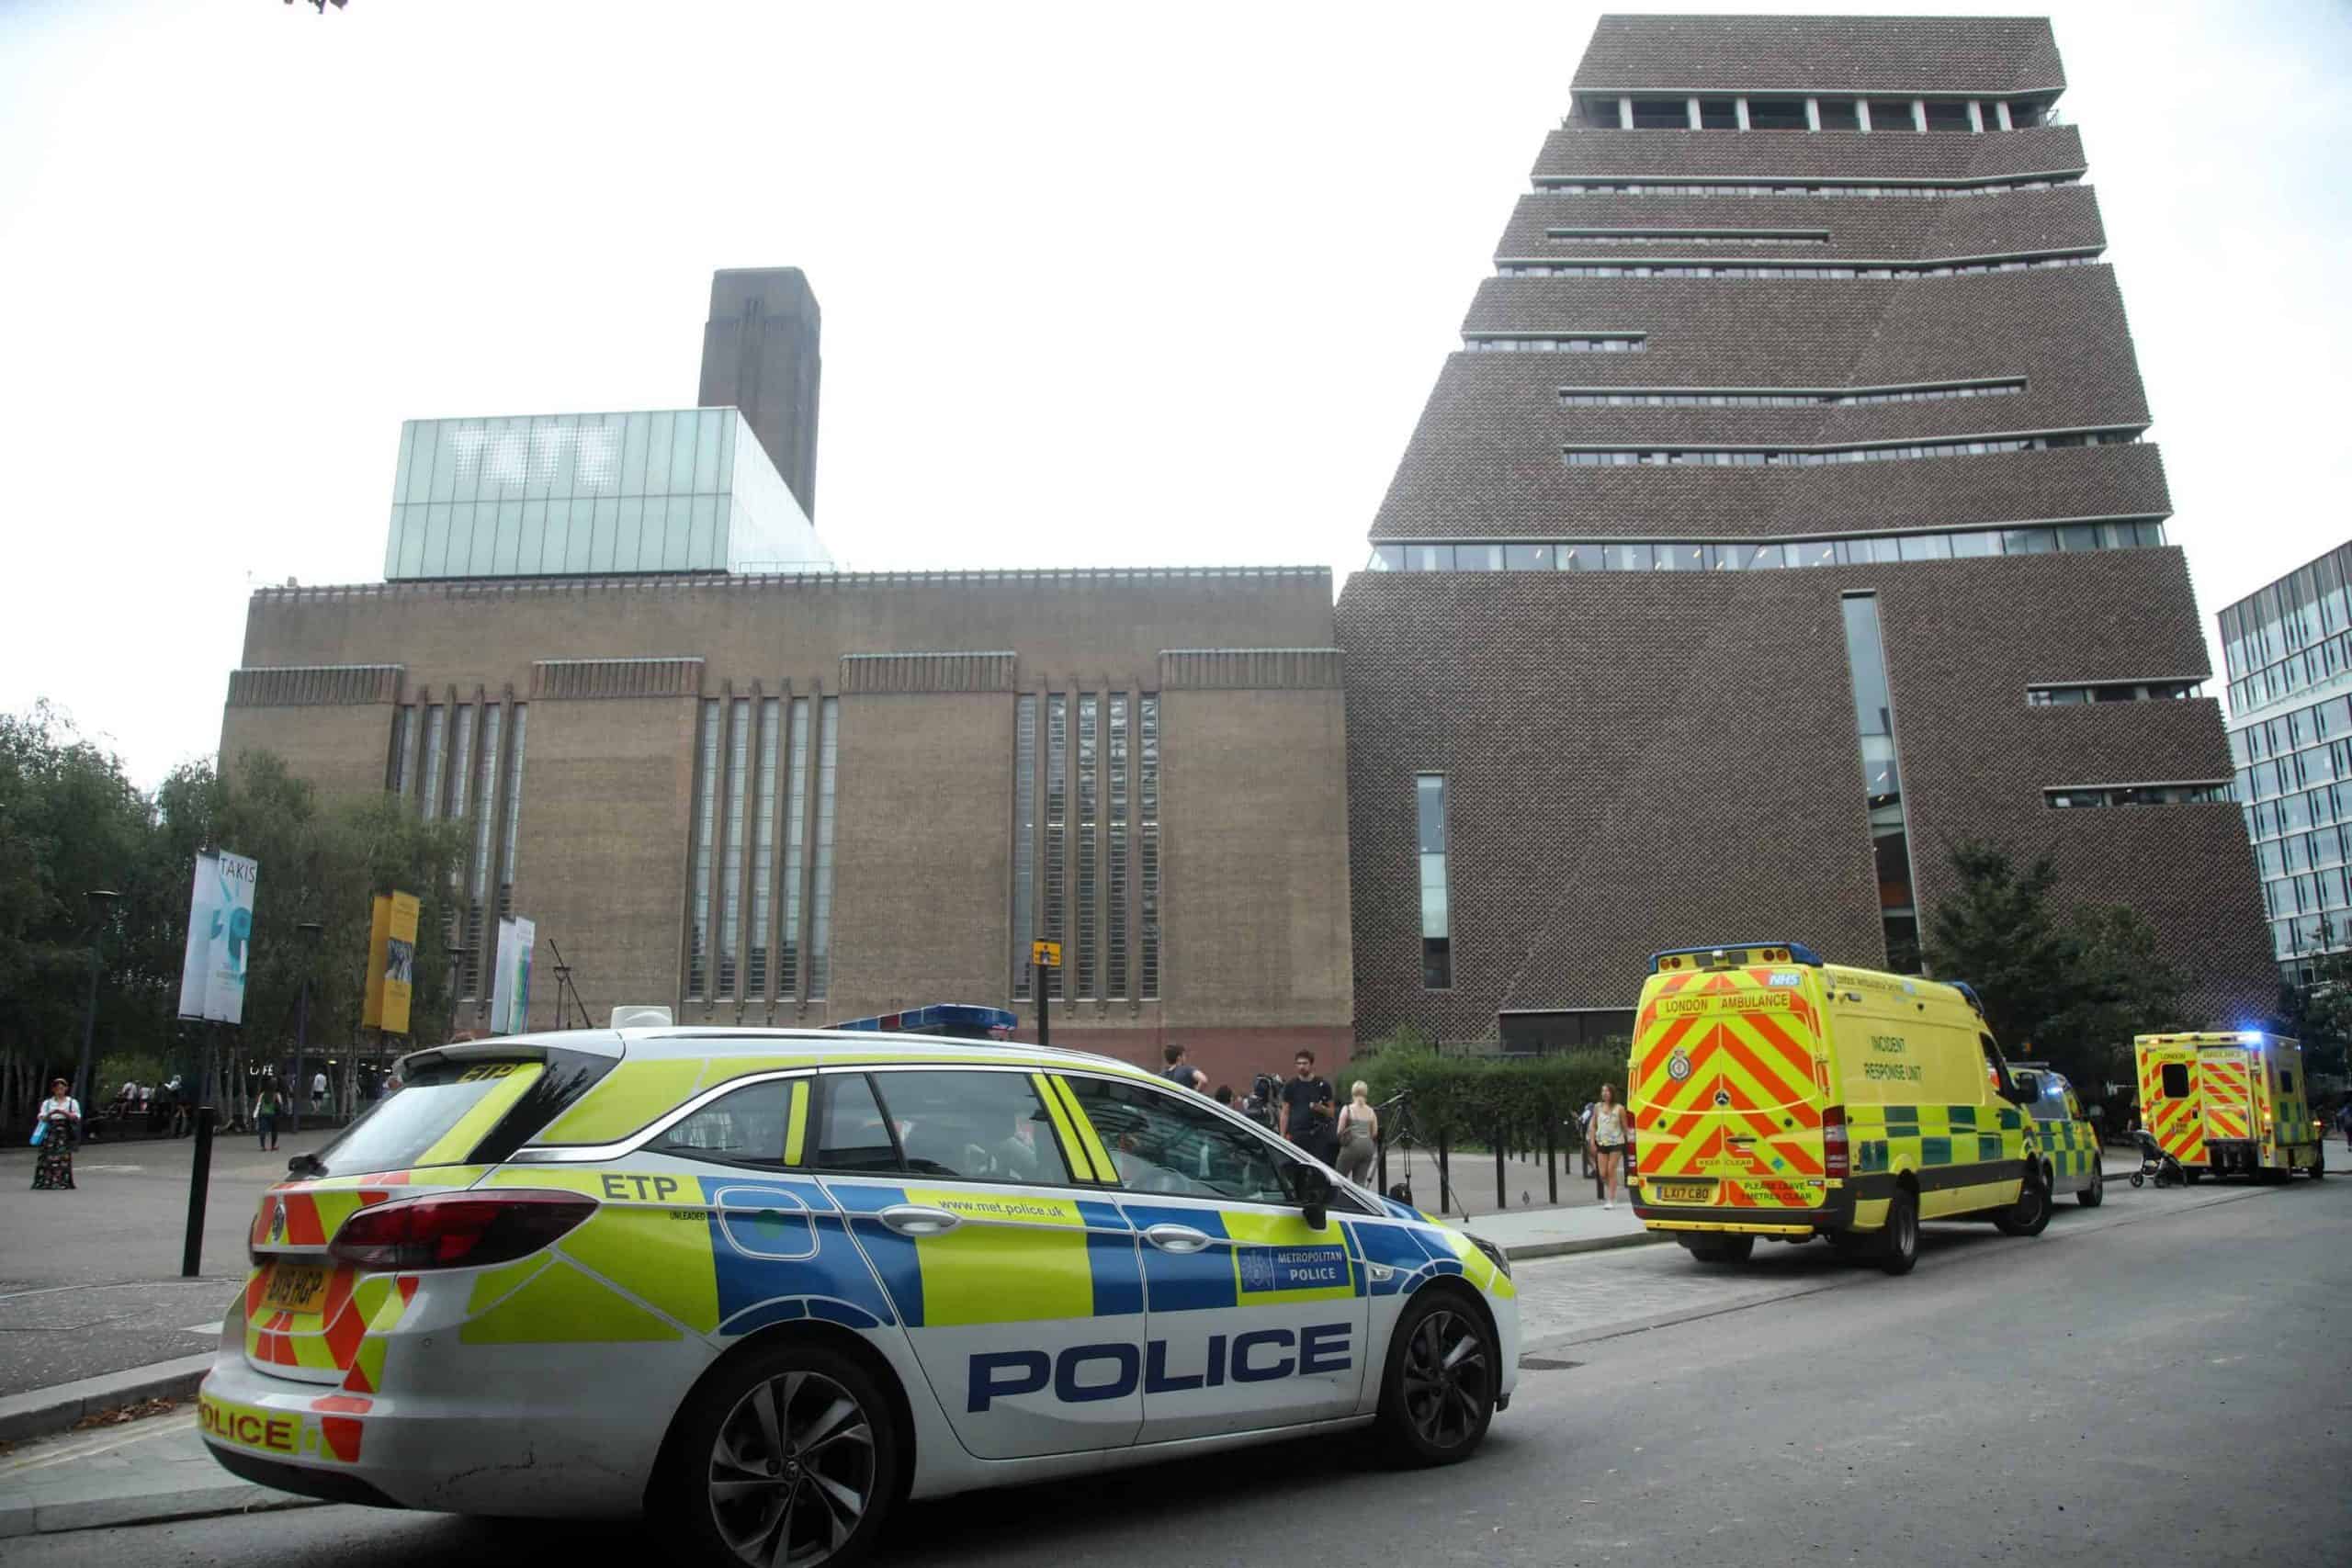 Six-year-old injured in Tate Modern plunge now able to go outside